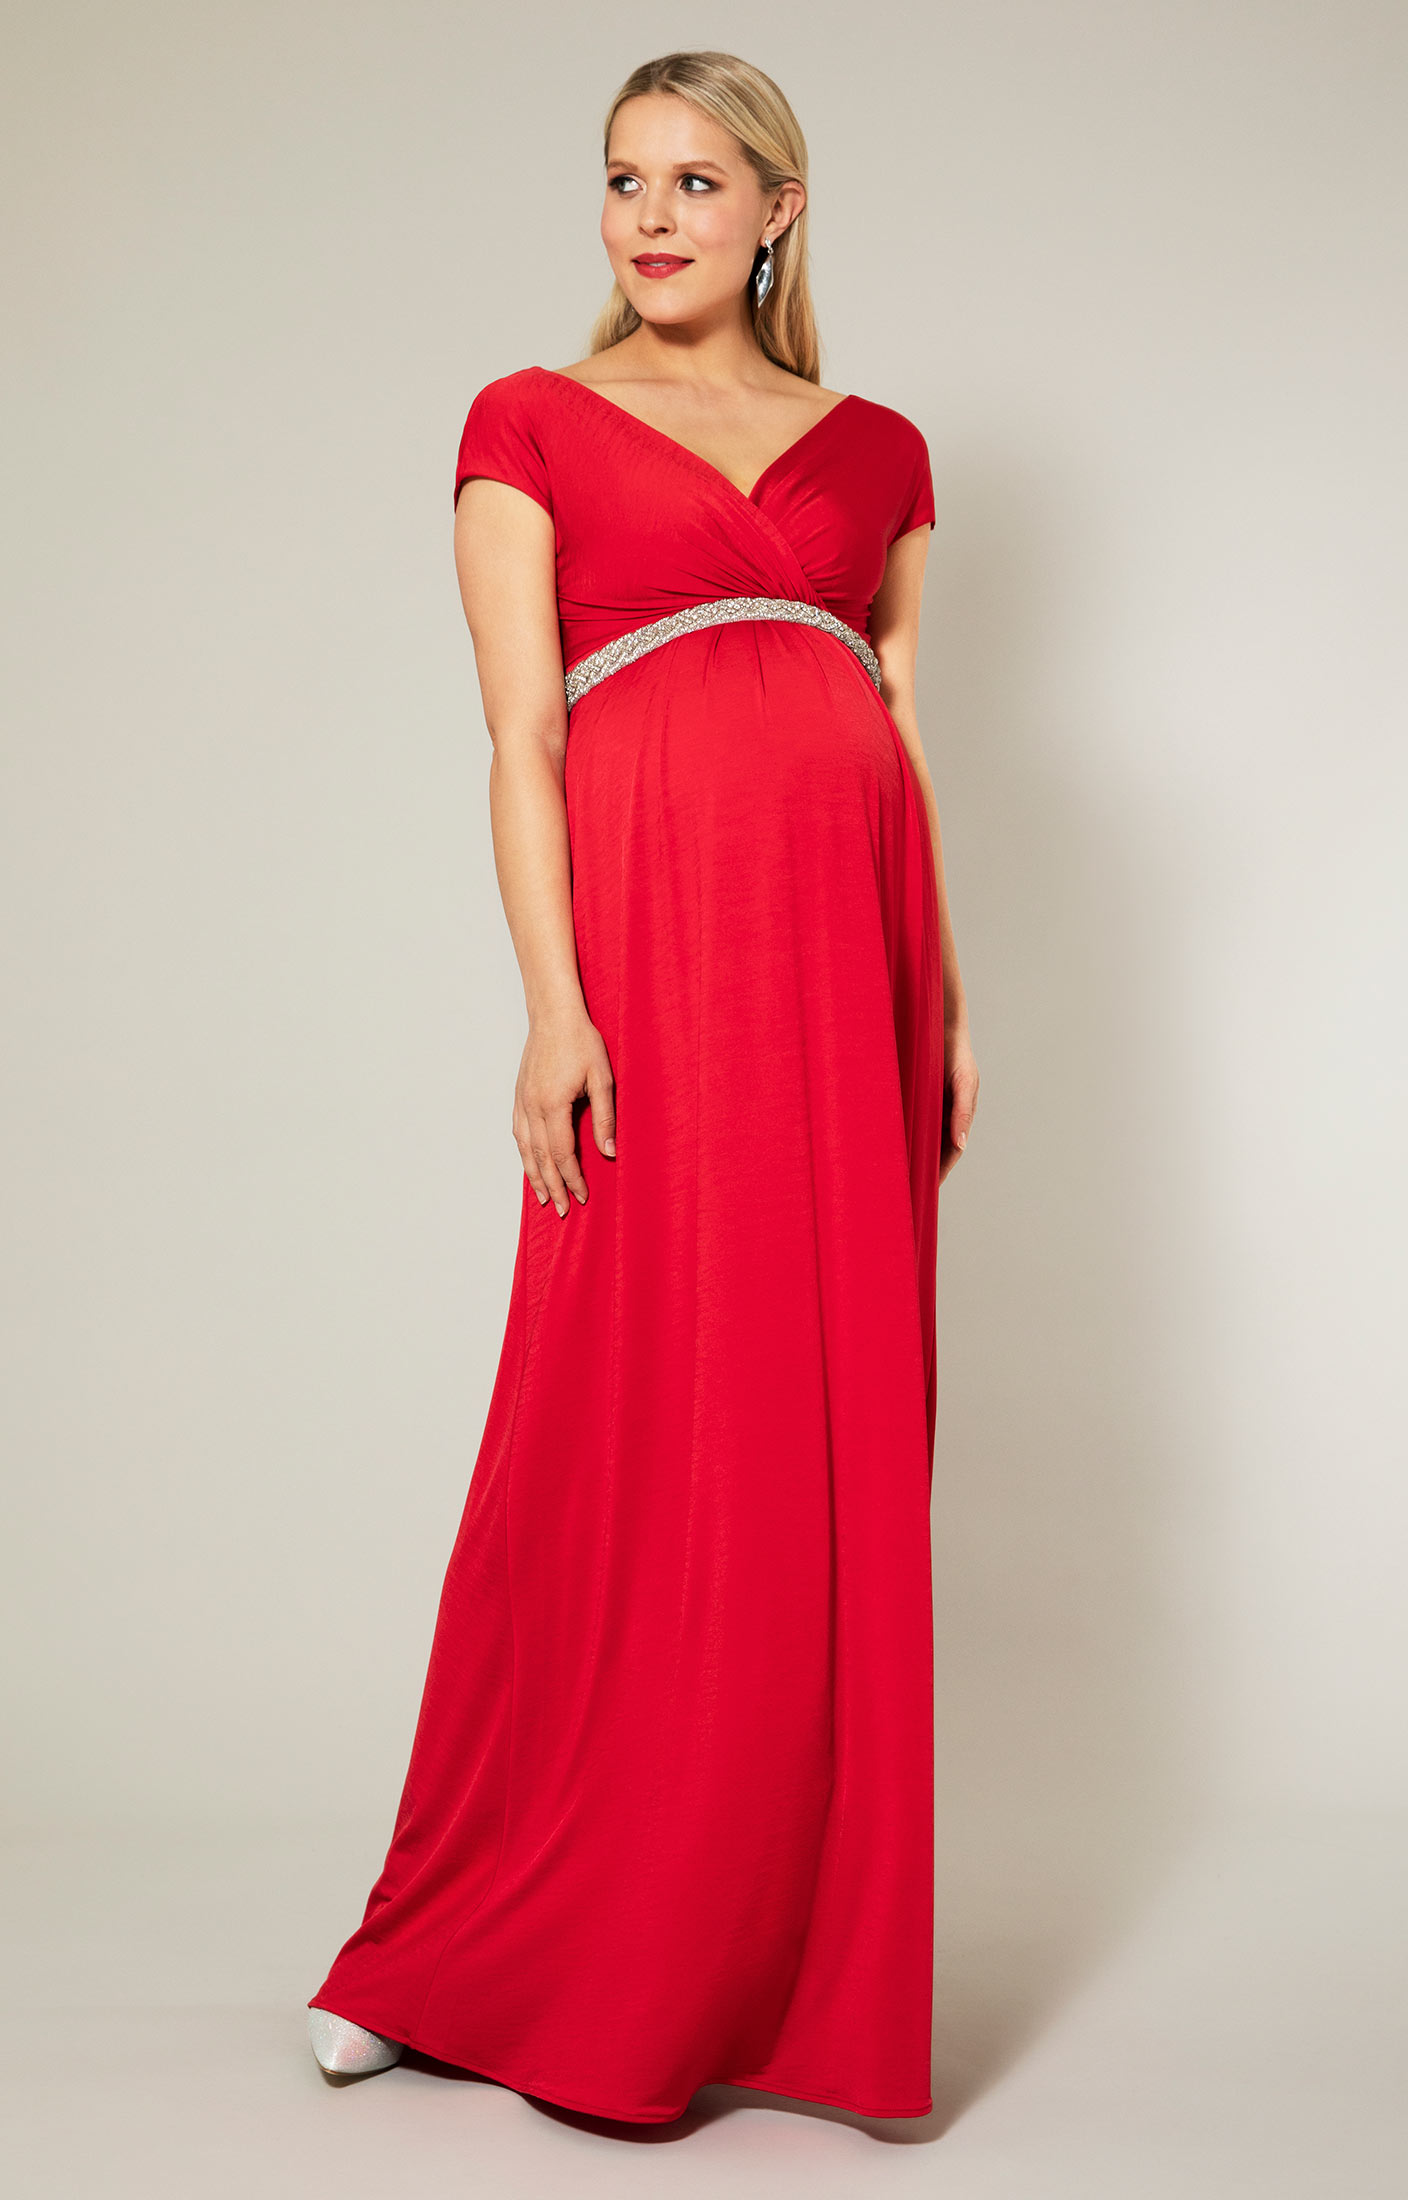 Chloe Lace Maternity Dress Scarlet - Maternity Wedding Dresses, Evening Wear  and Party Clothes by Tiffany Rose | Maternity dresses, Lace maternity dress,  Red maternity dress